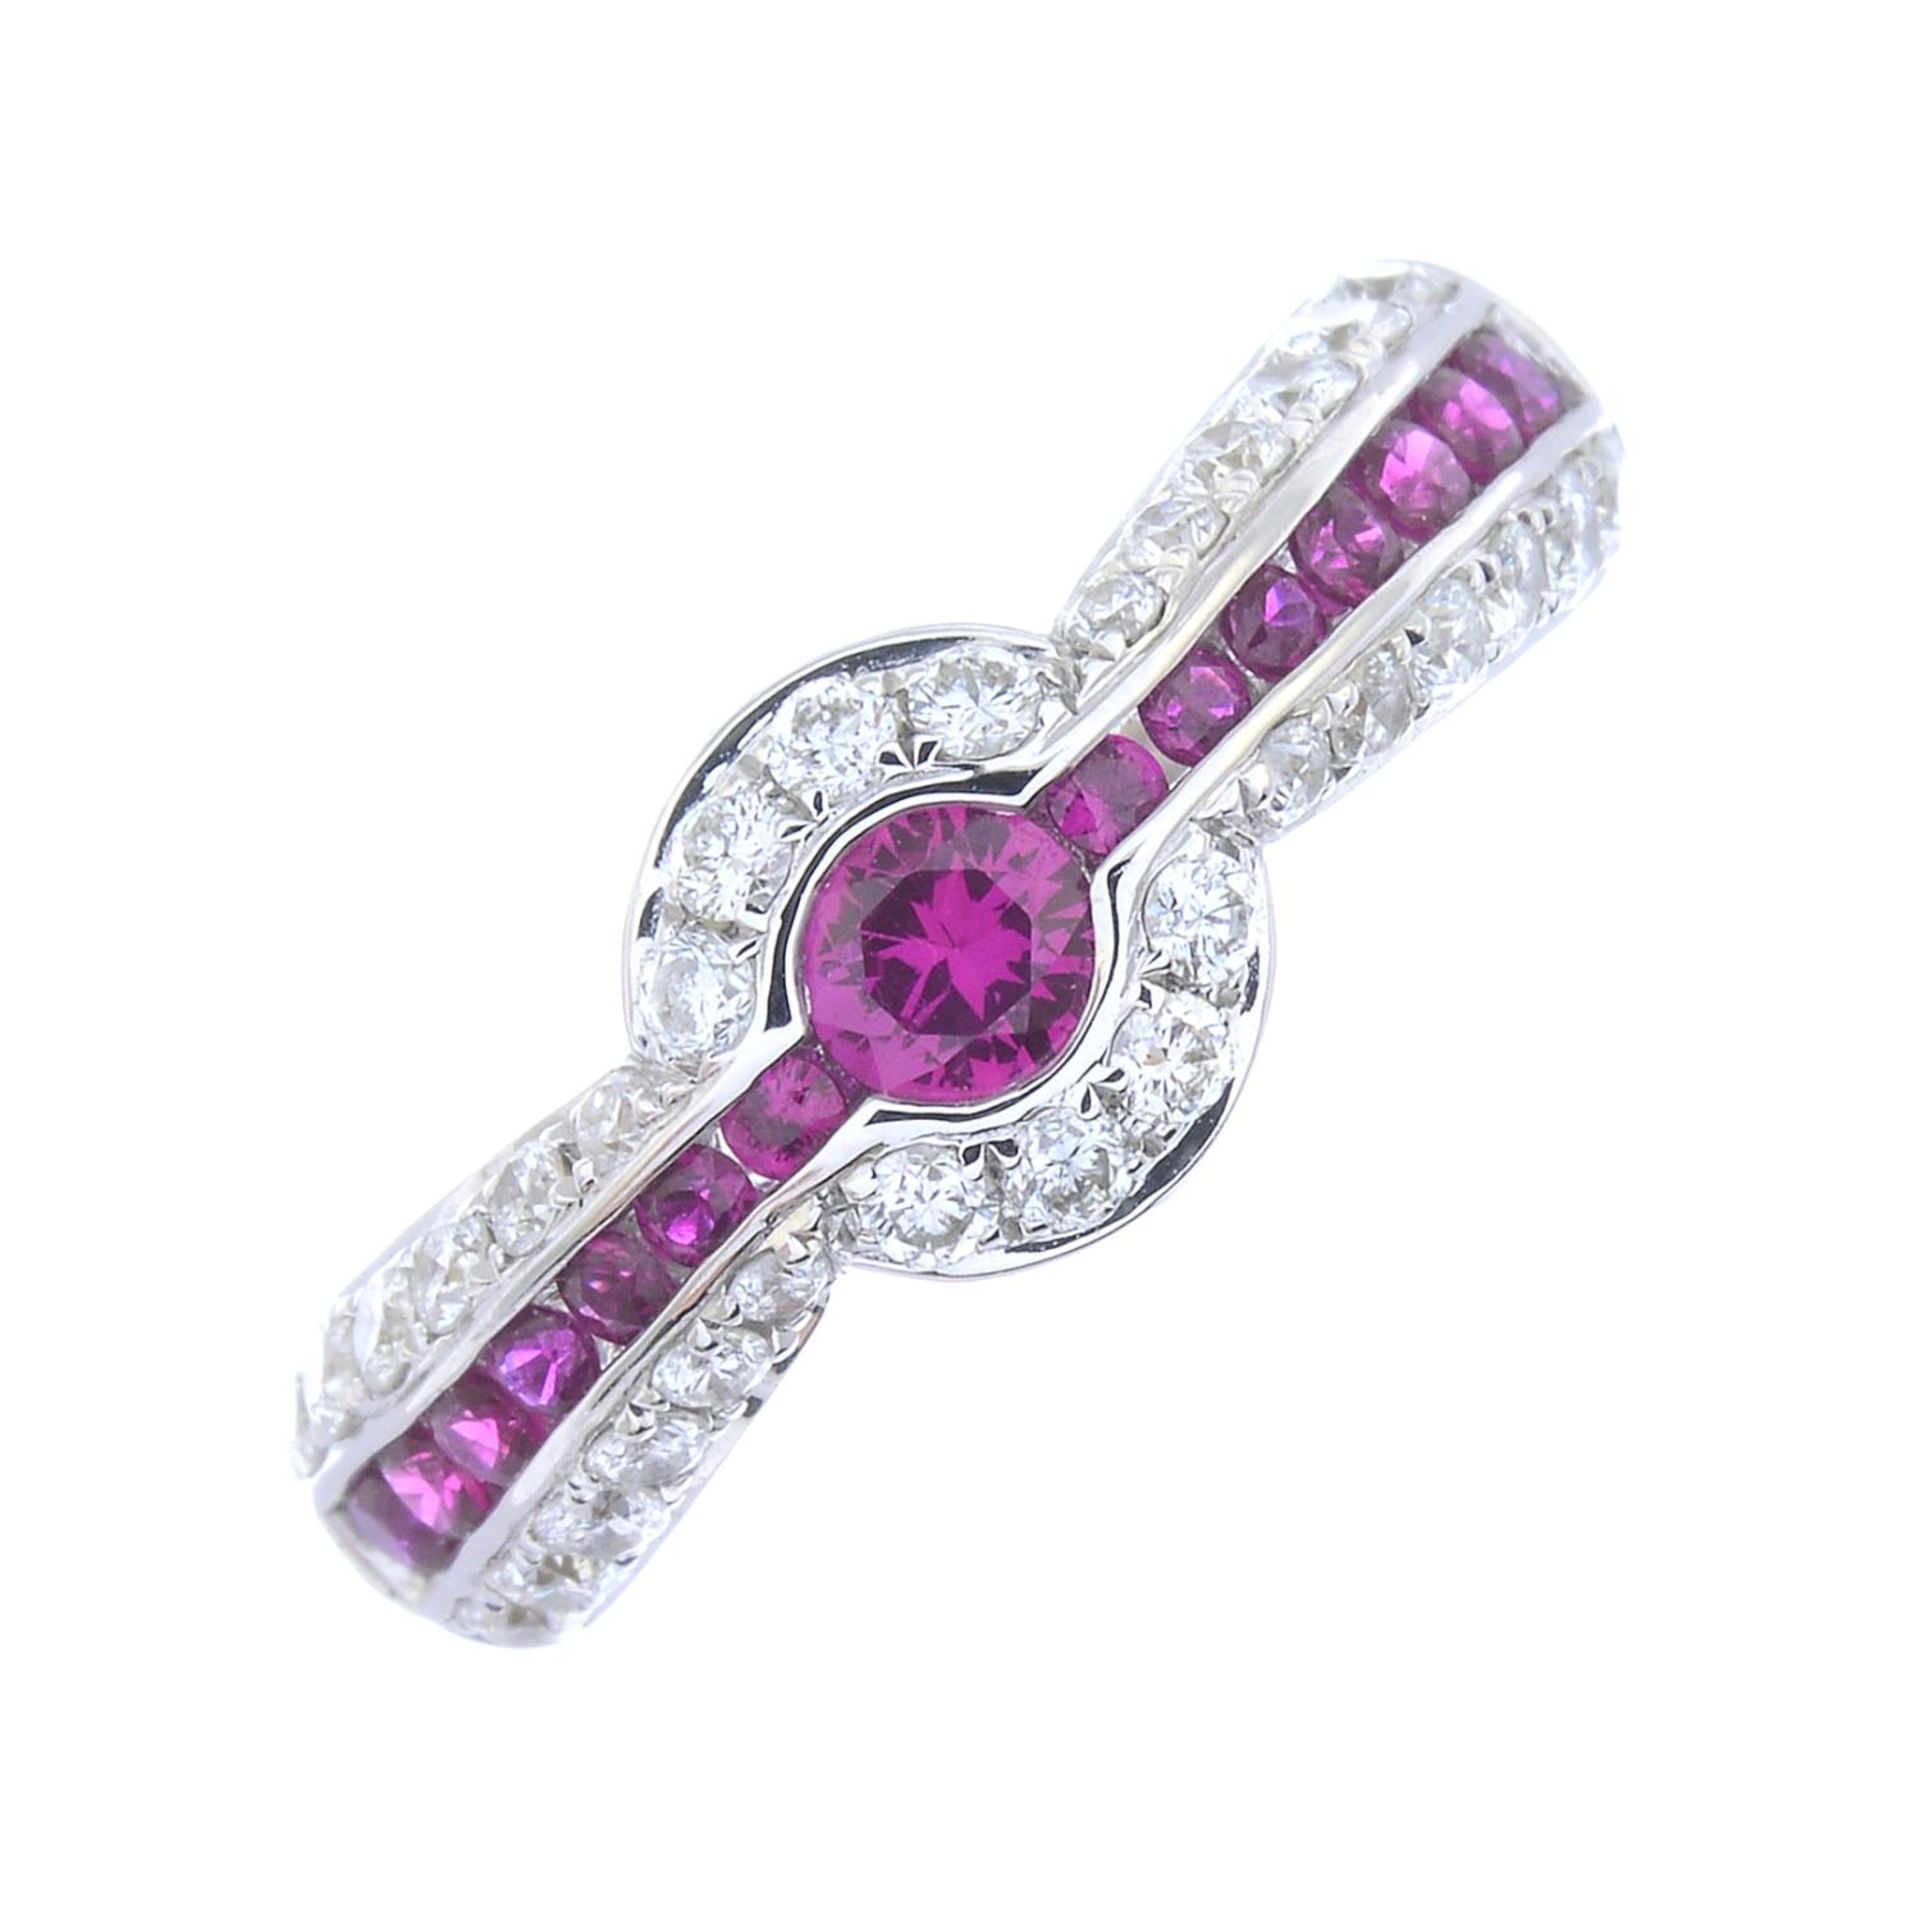 A diamond and ruby dress ring.Total ruby weight 0.48ct, total diamond weight 0.44ct.